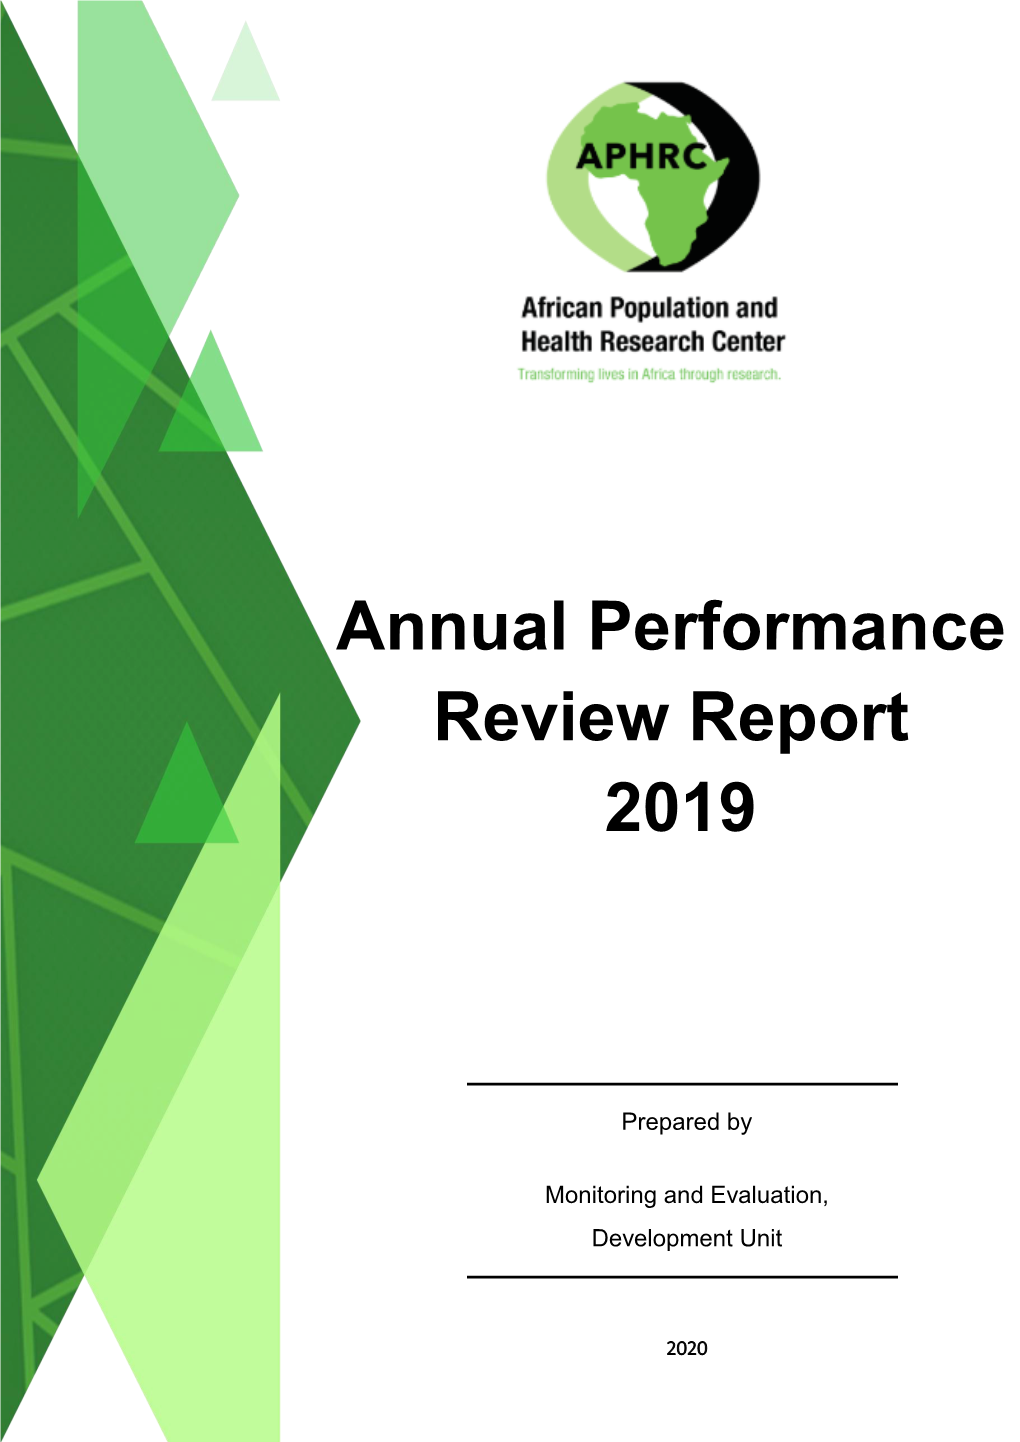 Annual Performance Review Report 2019